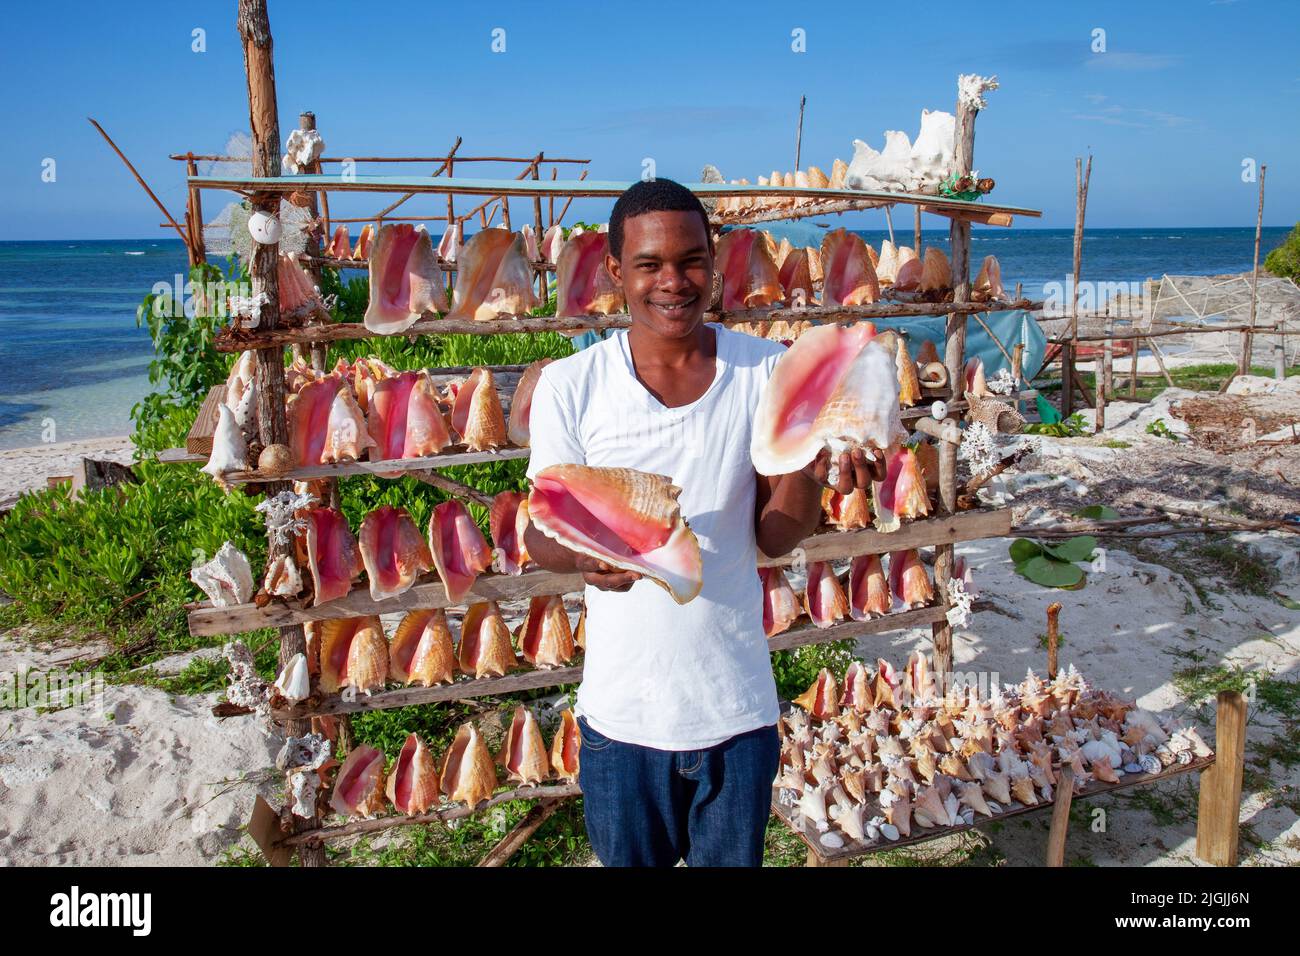 Jamaica,  Along the north coast you can buy Conch shells as souvenir, but it's illegal to import these into most countries. Stock Photo